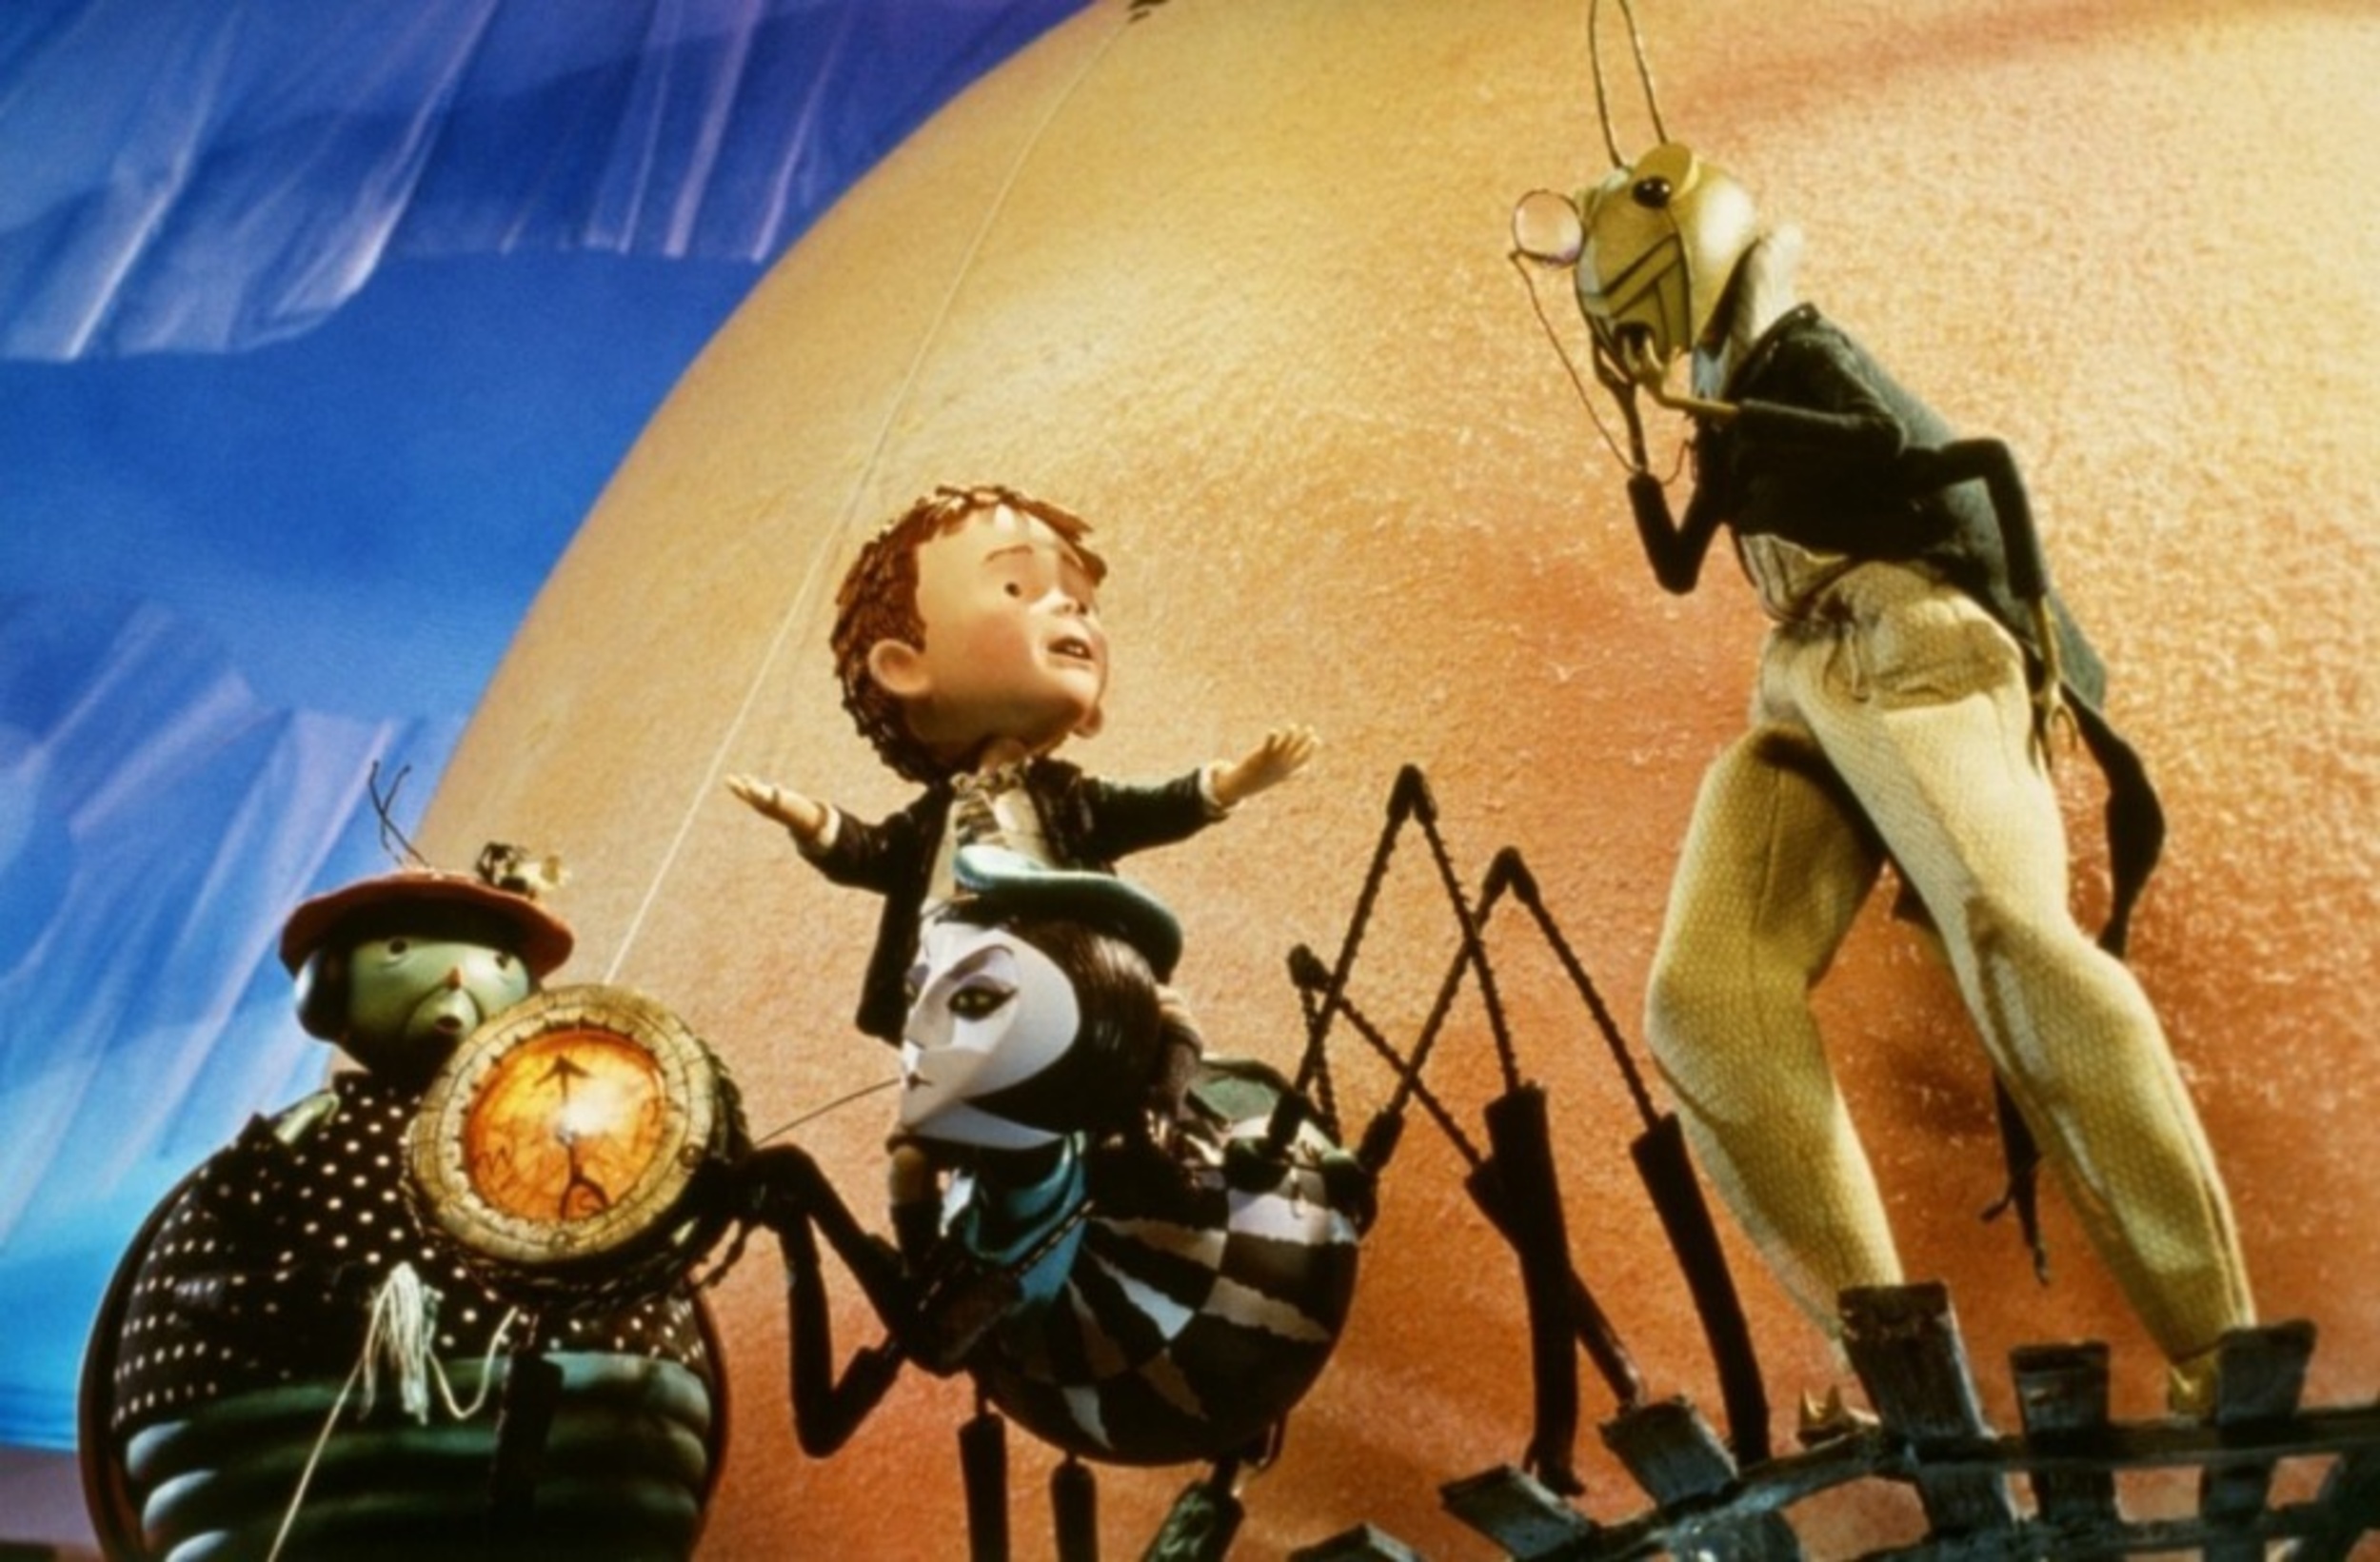 <p>After directing <em>The Nightmare Before Christmas</em>, director Henry Selick paired with Disney once again to adapt Roald Dahl’s <em>James and the Giant Peach</em>. The stop-motion animated/live-action hybrid film tells the story of an orphaned boy who befriends a group of bugs who live inside a giant peach. While the film is not as popular as Selick’s other titles, it offers a whimsical and music-filled adventure with heartfelt themes at its core, as well as plenty of memorable and peculiar characters. </p><p>You may also like: <a href='https://www.yardbarker.com/entertainment/articles/20_performances_that_thwarted_audience_expectations_032324/s1__39891253'>20 performances that thwarted audience expectations</a></p>